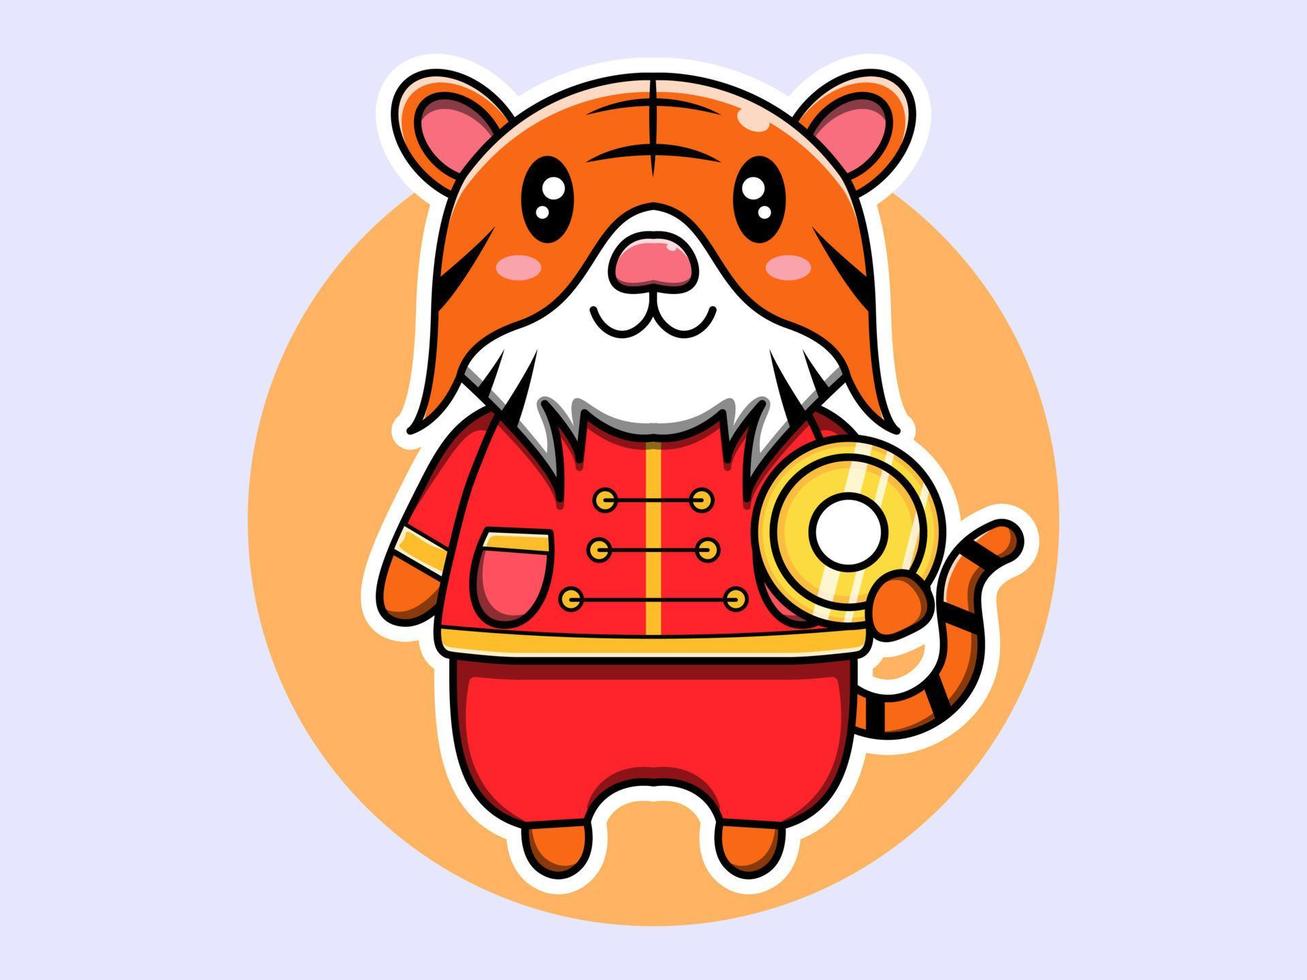 Cute Tiner chinese new year character vector icon illustration. Isolated flat design.